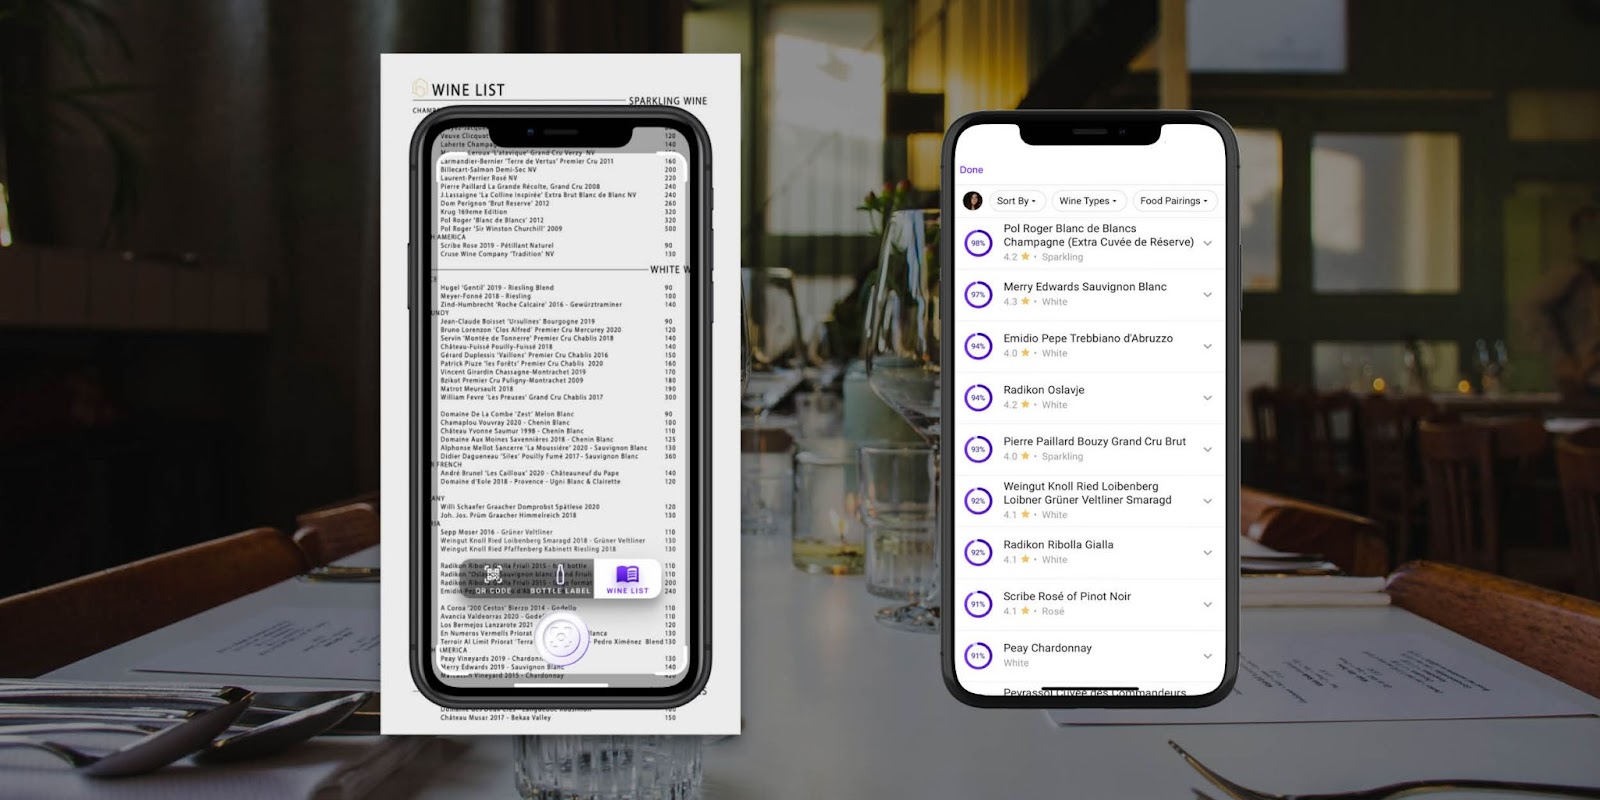 With Sippd's Wine Scanner, you can scan bottle labels and restaurant wine lists in seconds.